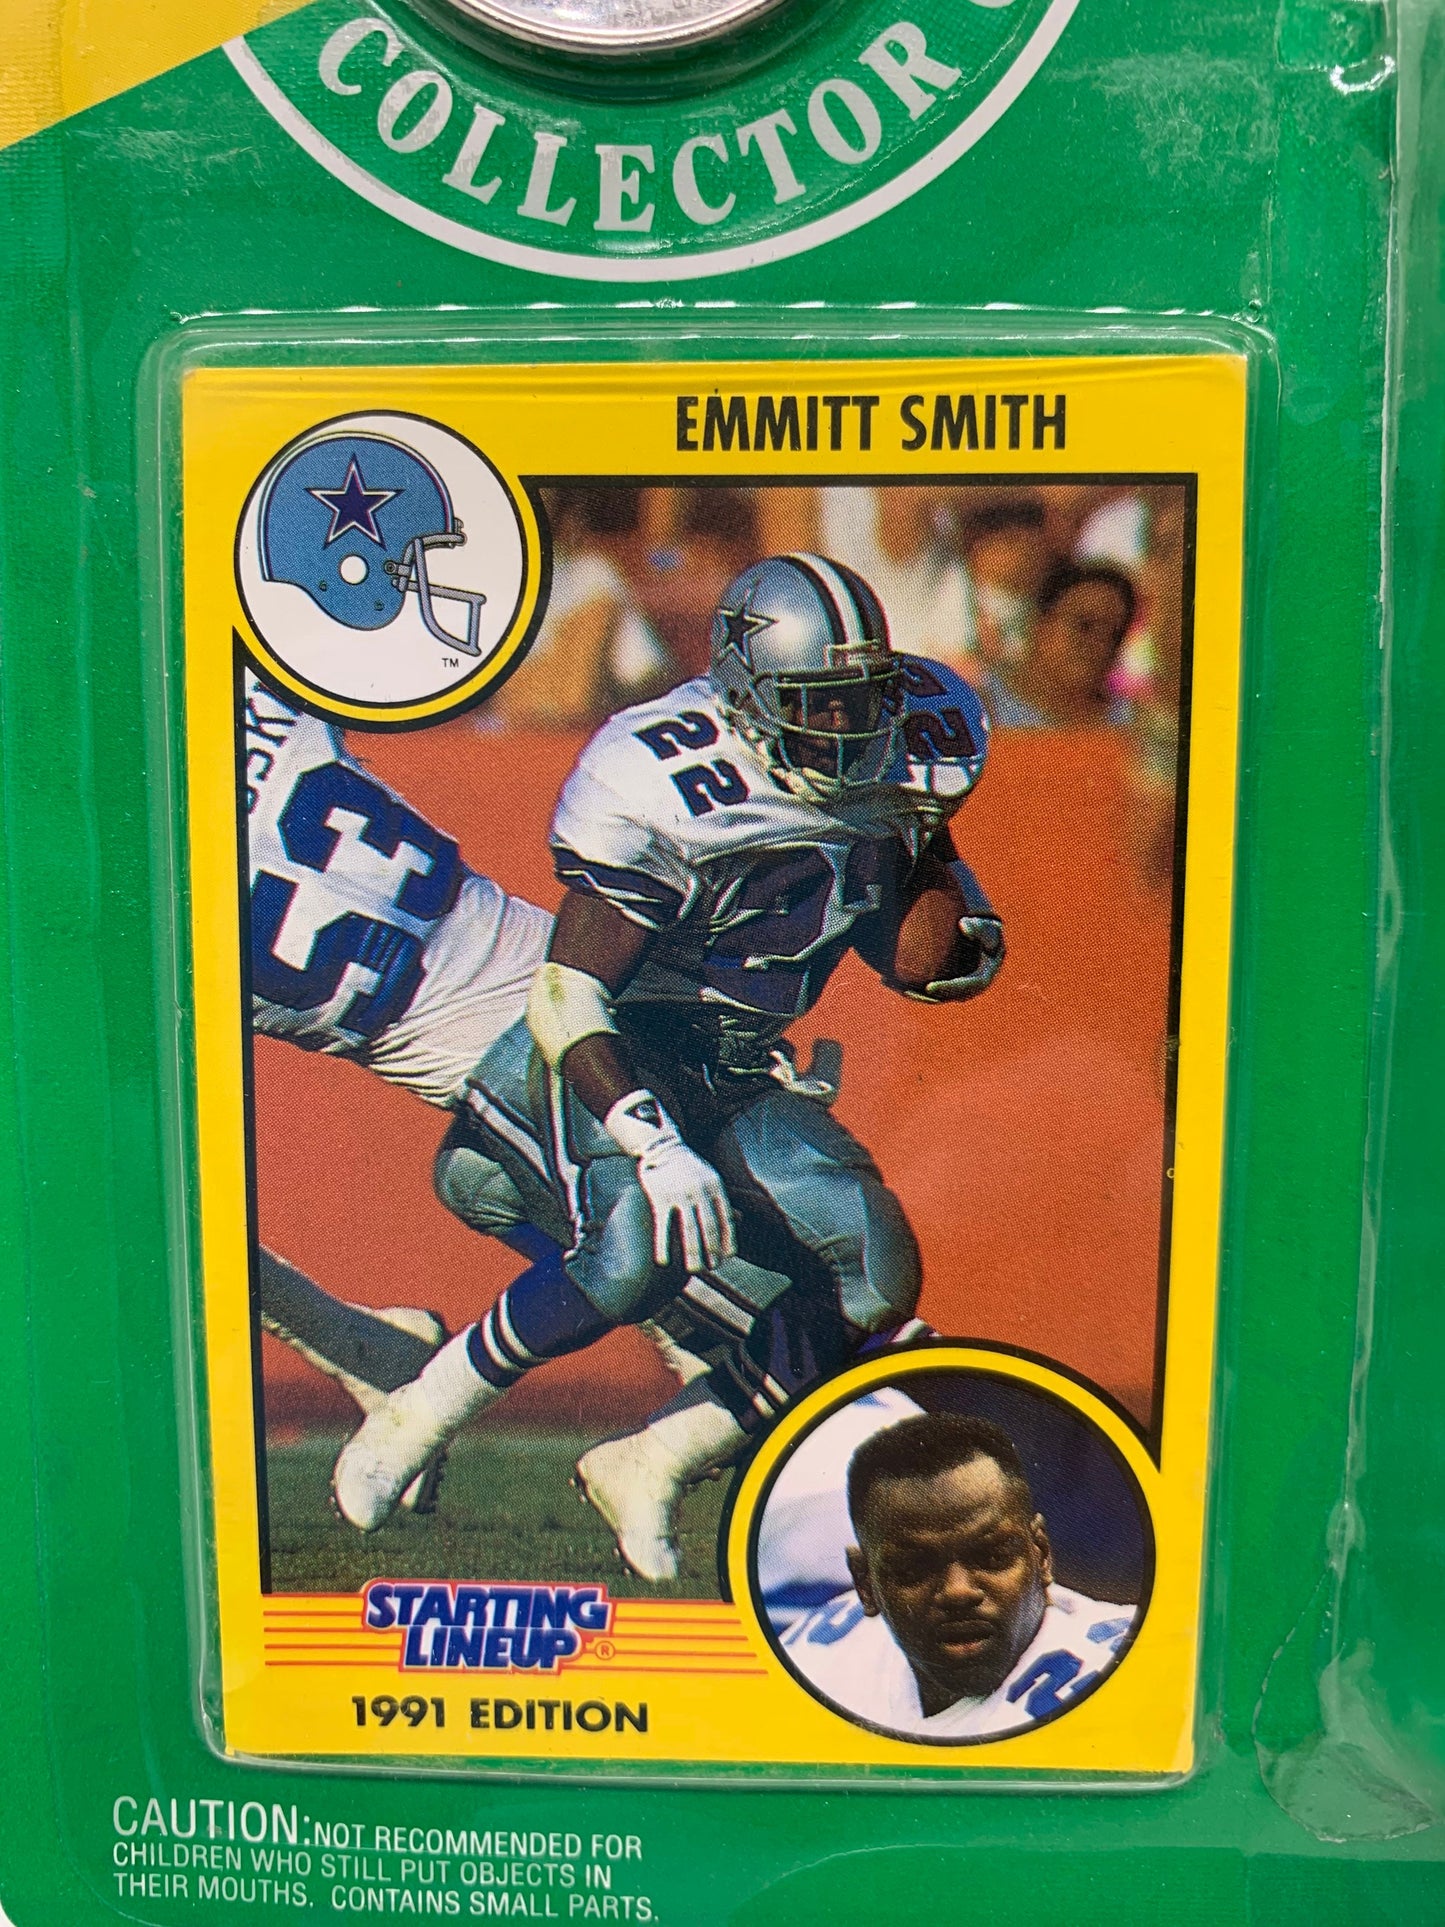 Dallas Cowboys - Emmitt Smith - Sports Figure Vintage - Starting Lineup - Kenner - Man Cave Deco - Sports Memorabilia - Collector Coin